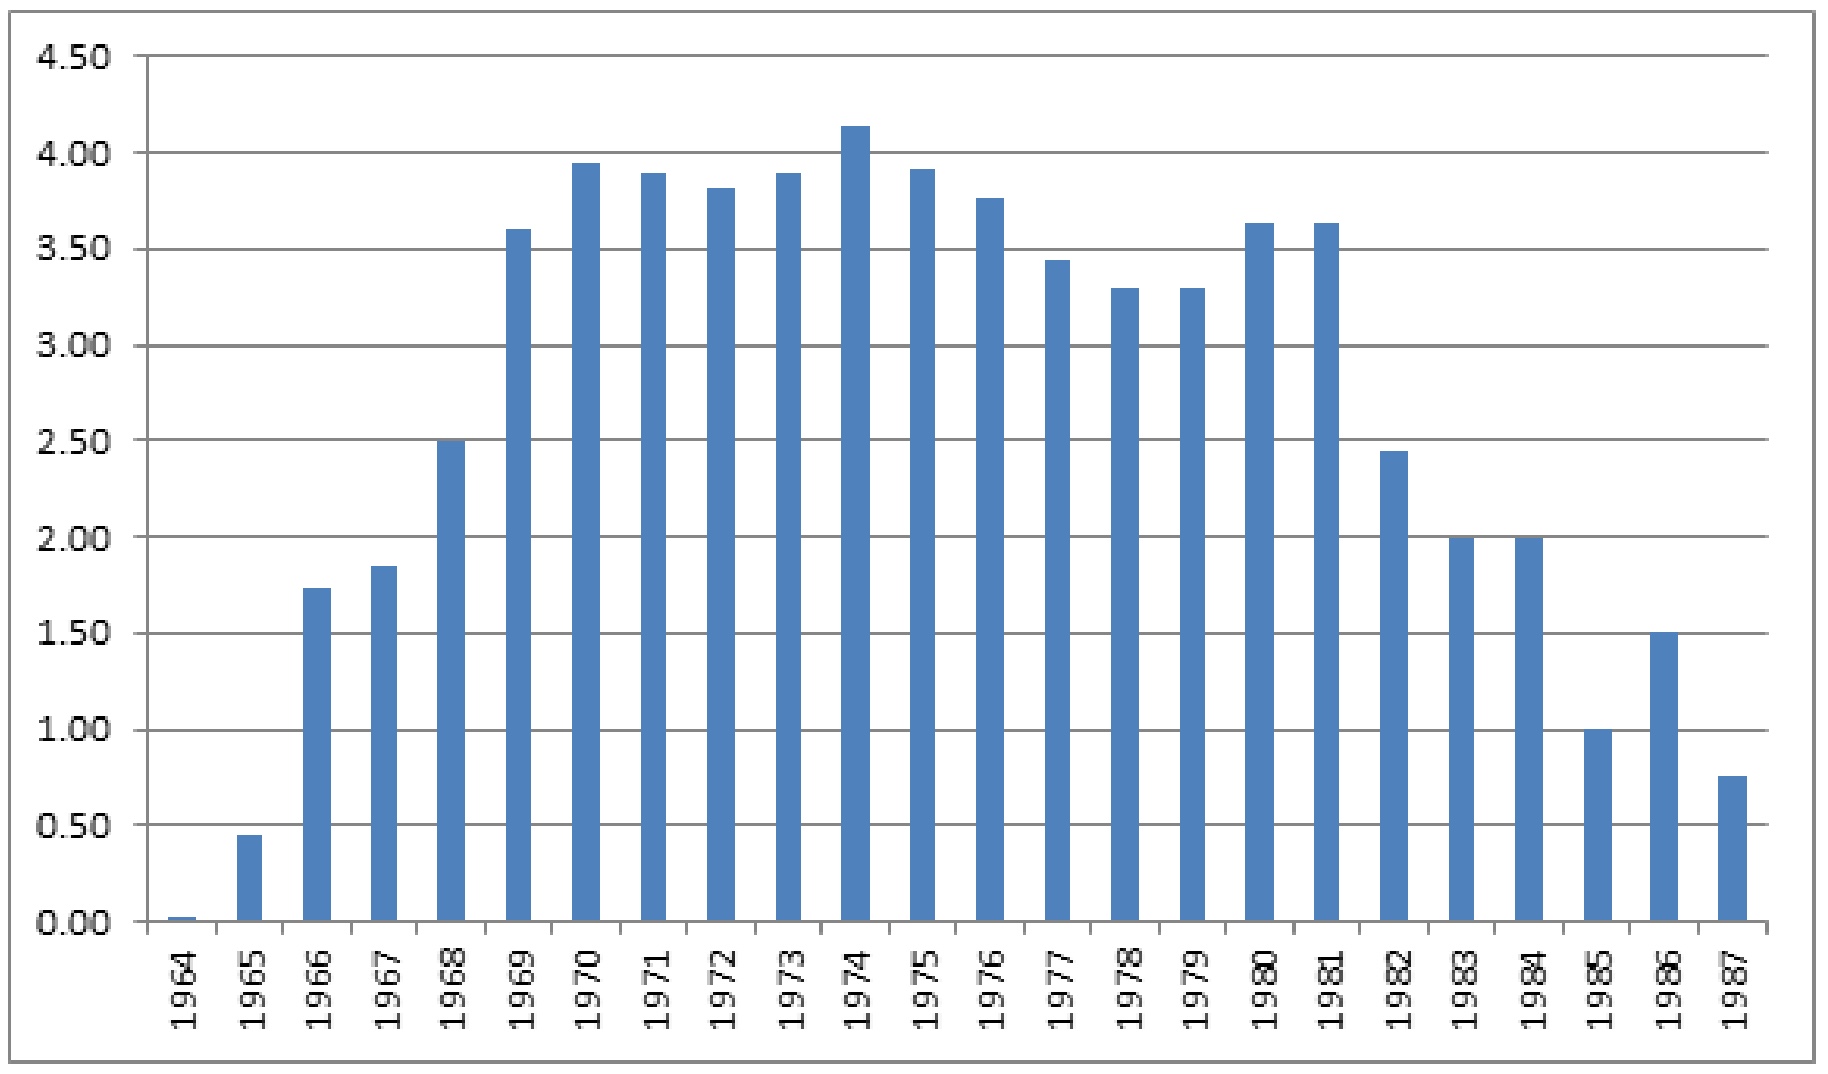 Annual ore production at Pine Point (Million Tonnes), 1964 - 1987.